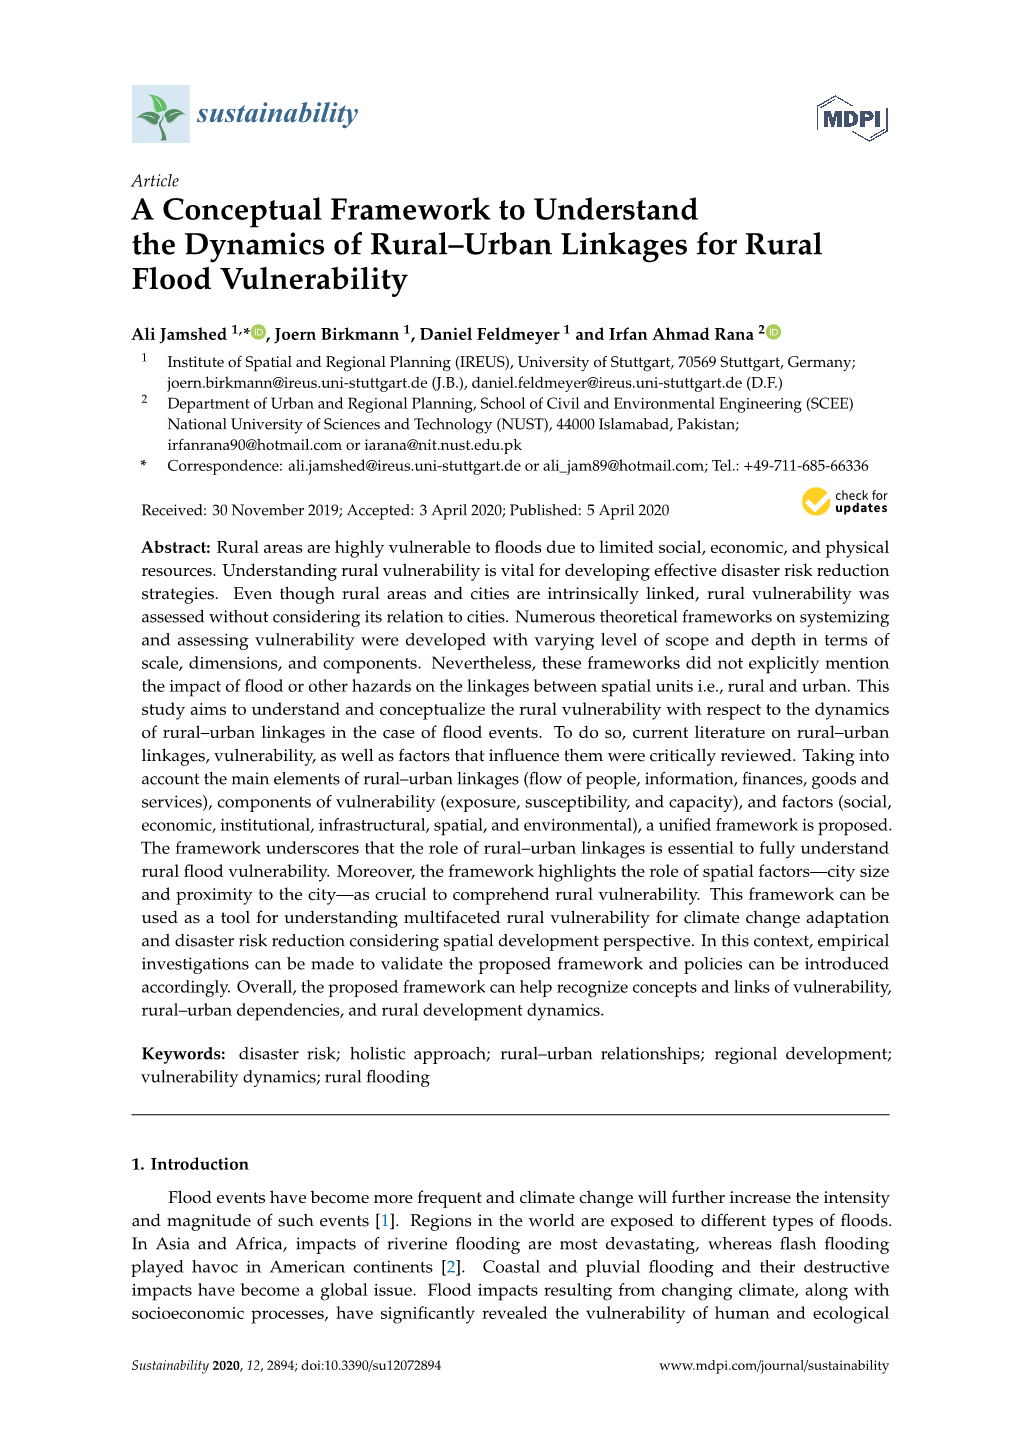 A Conceptual Framework to Understand the Dynamics of Rural–Urban Linkages for Rural Flood Vulnerability